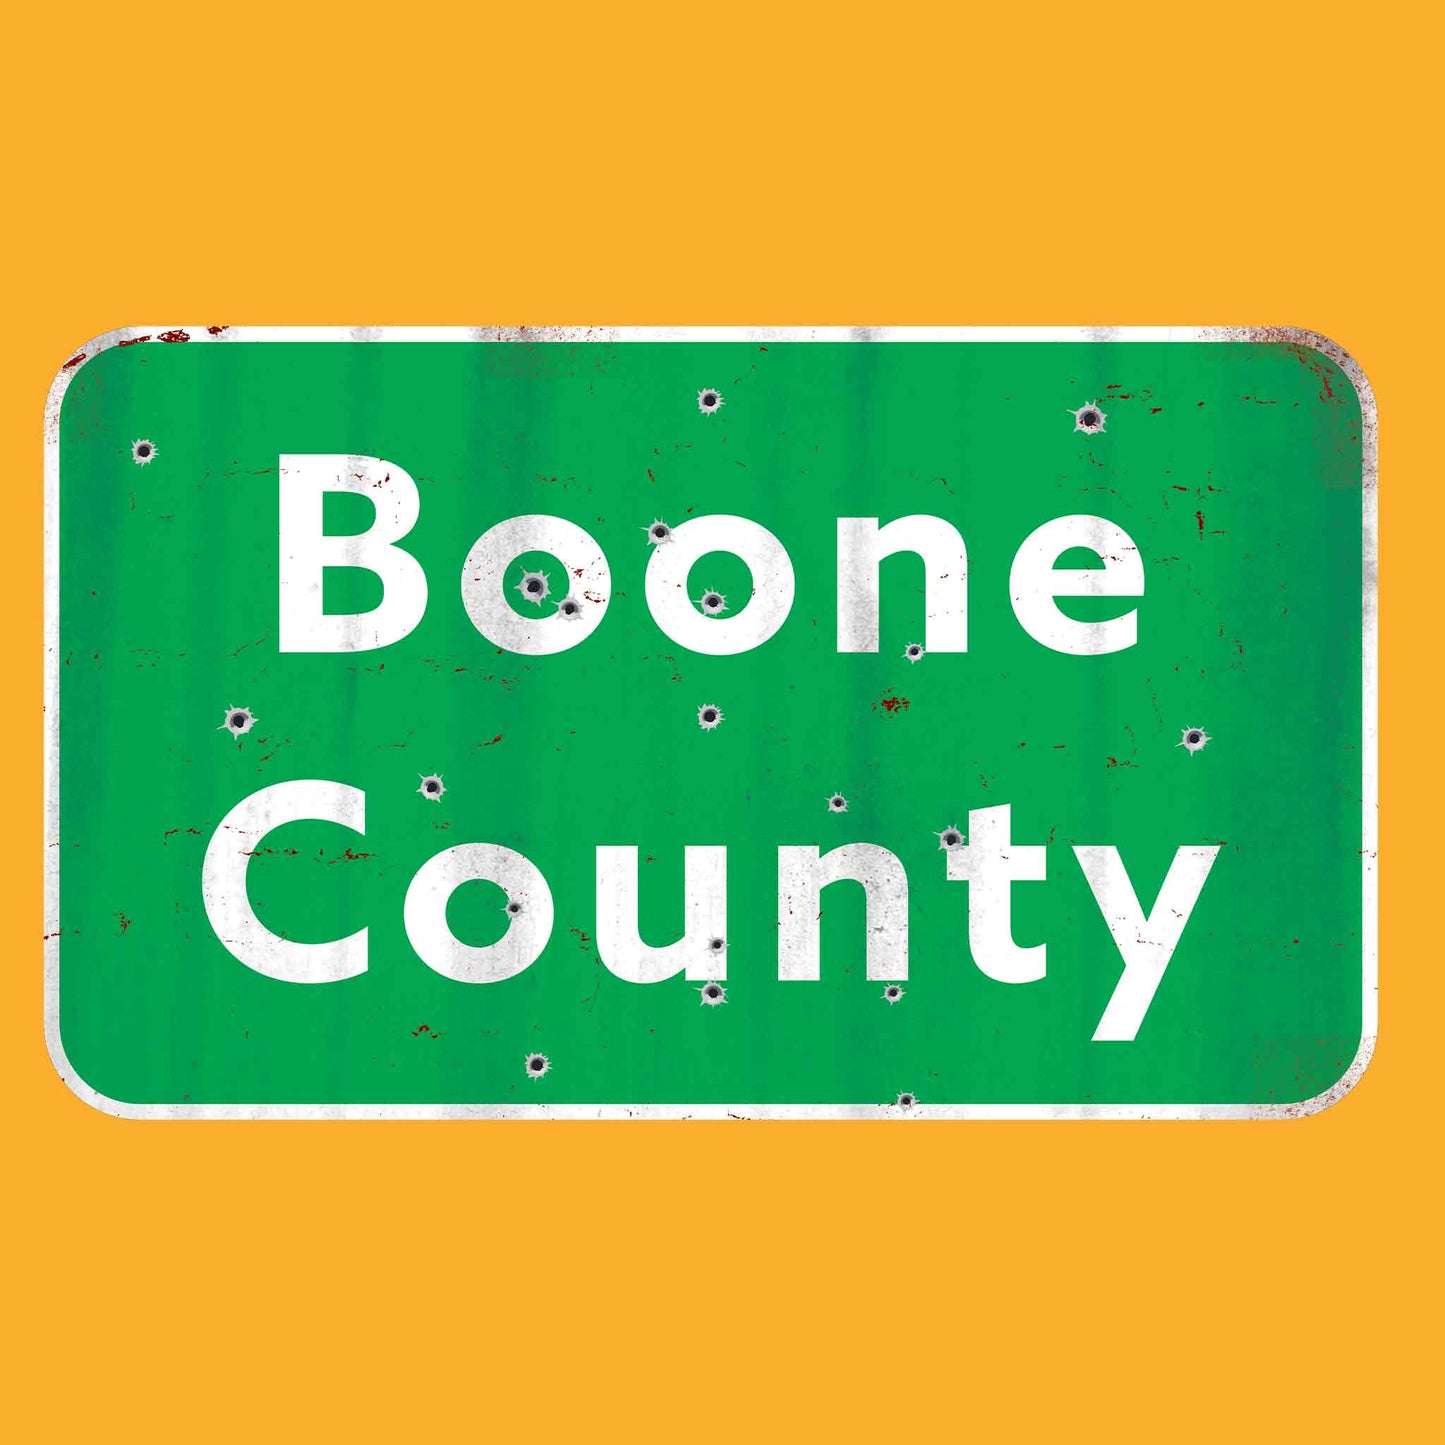 Boone County T-Shirt